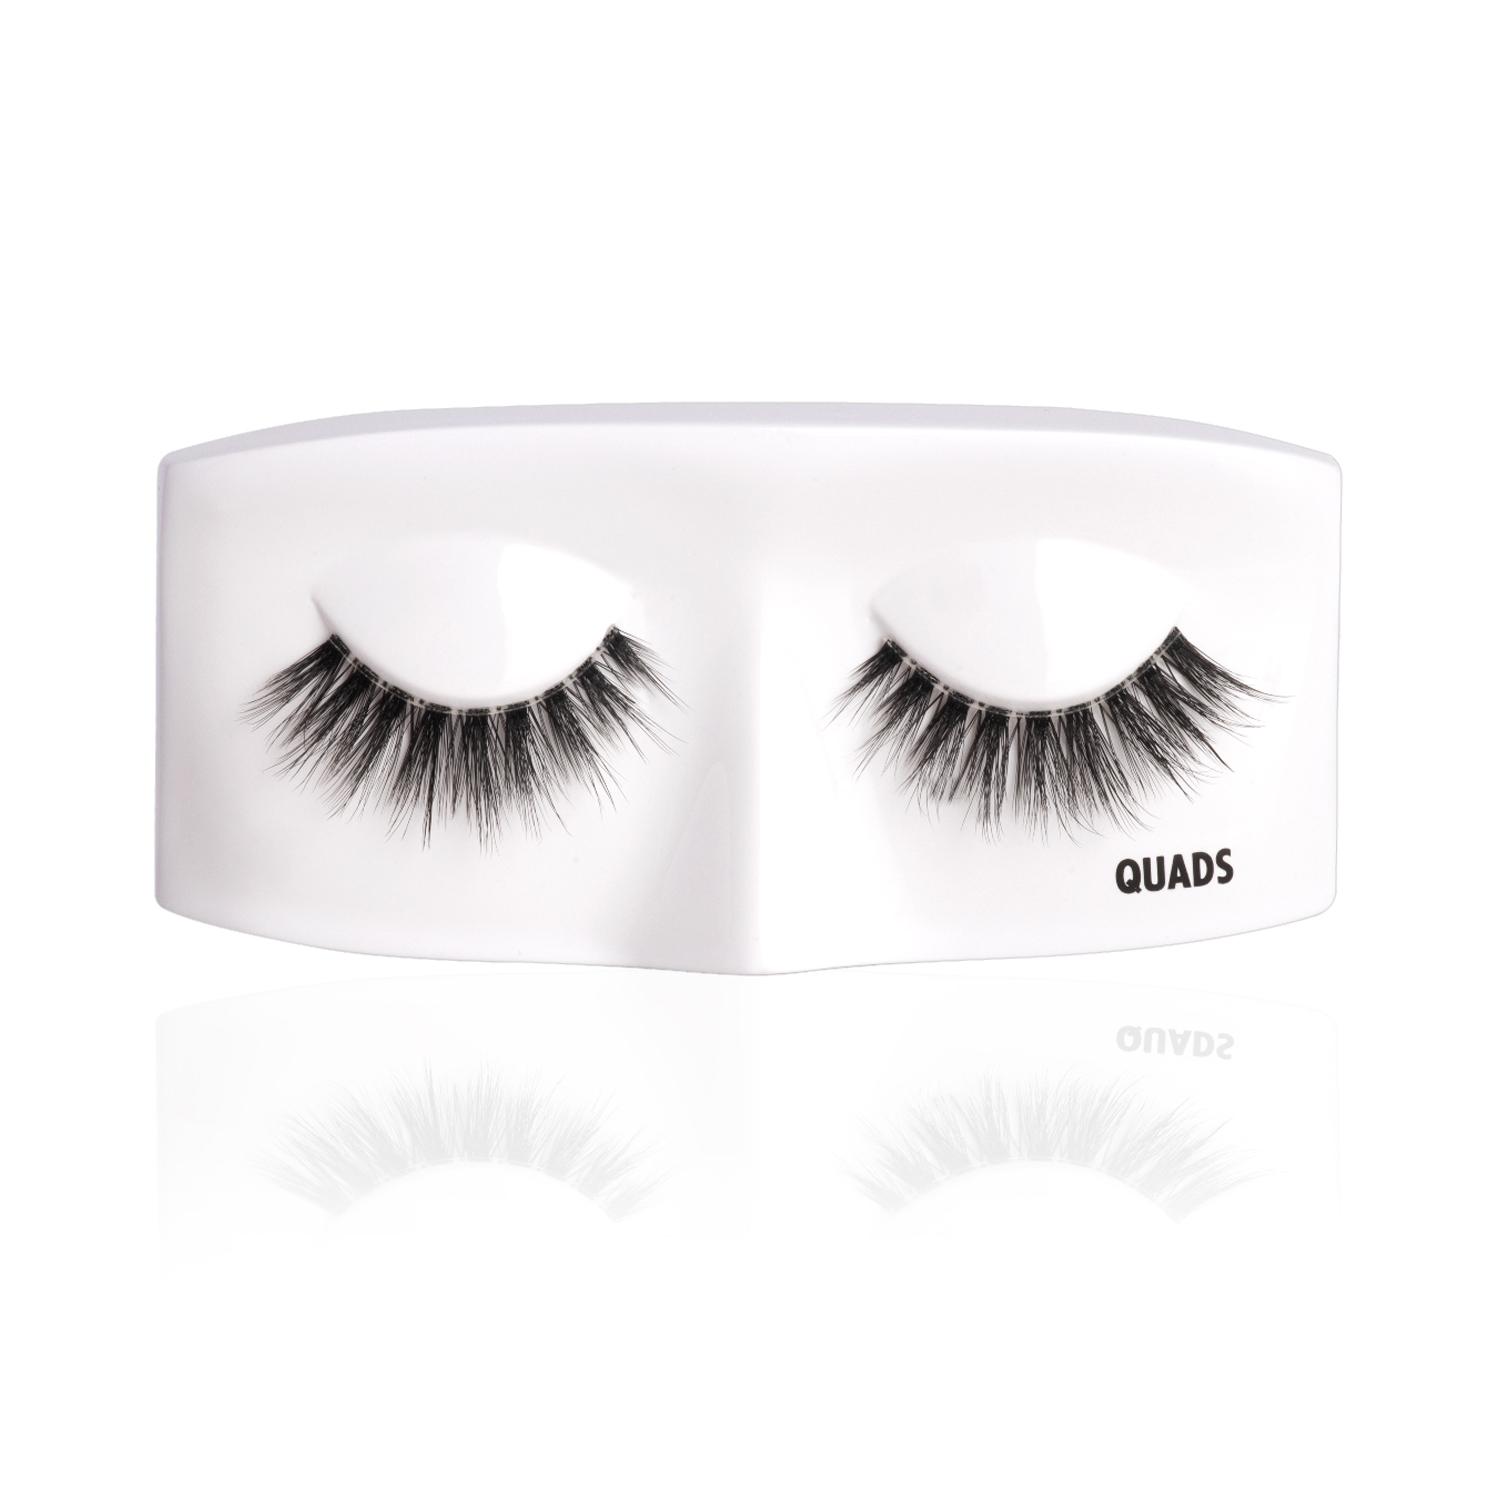 PAC | PAC Ace Of Lashes - Quads (1 Pair)